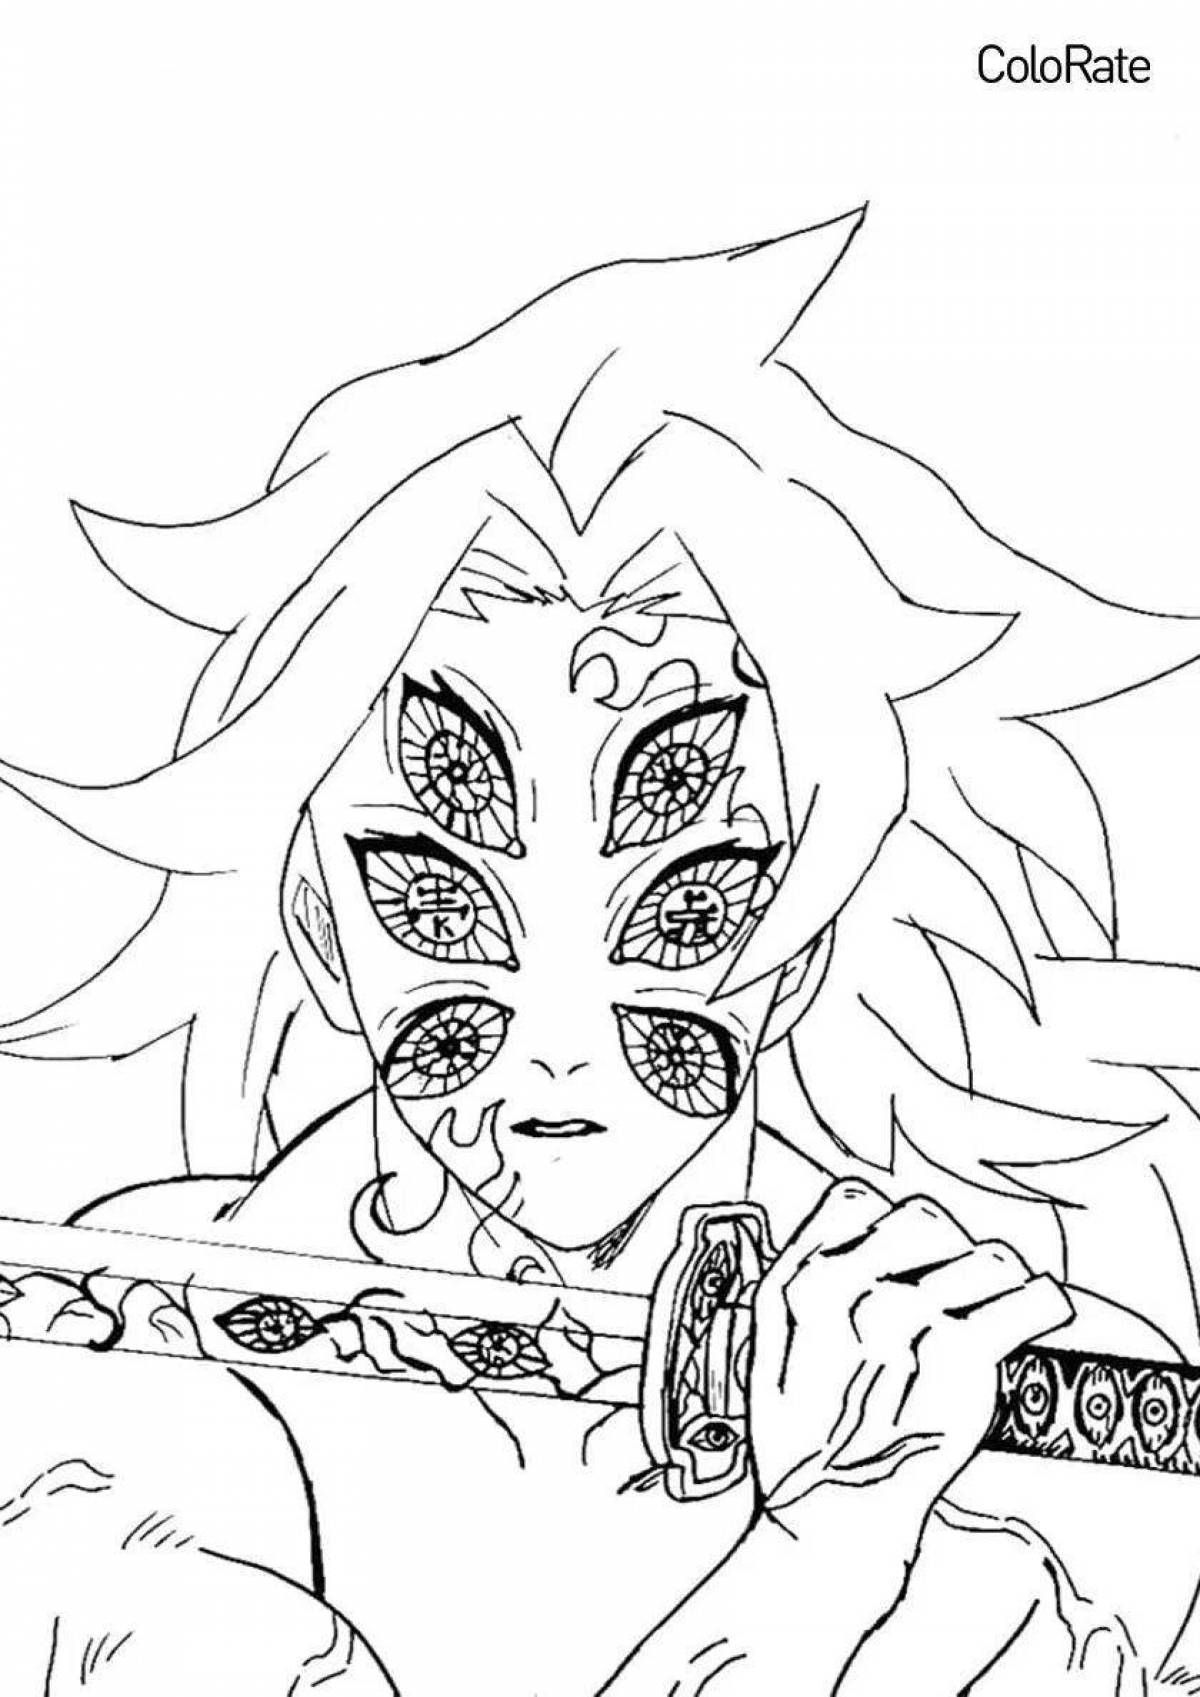 Cutting Blade Spectacular Demon Coloring Page